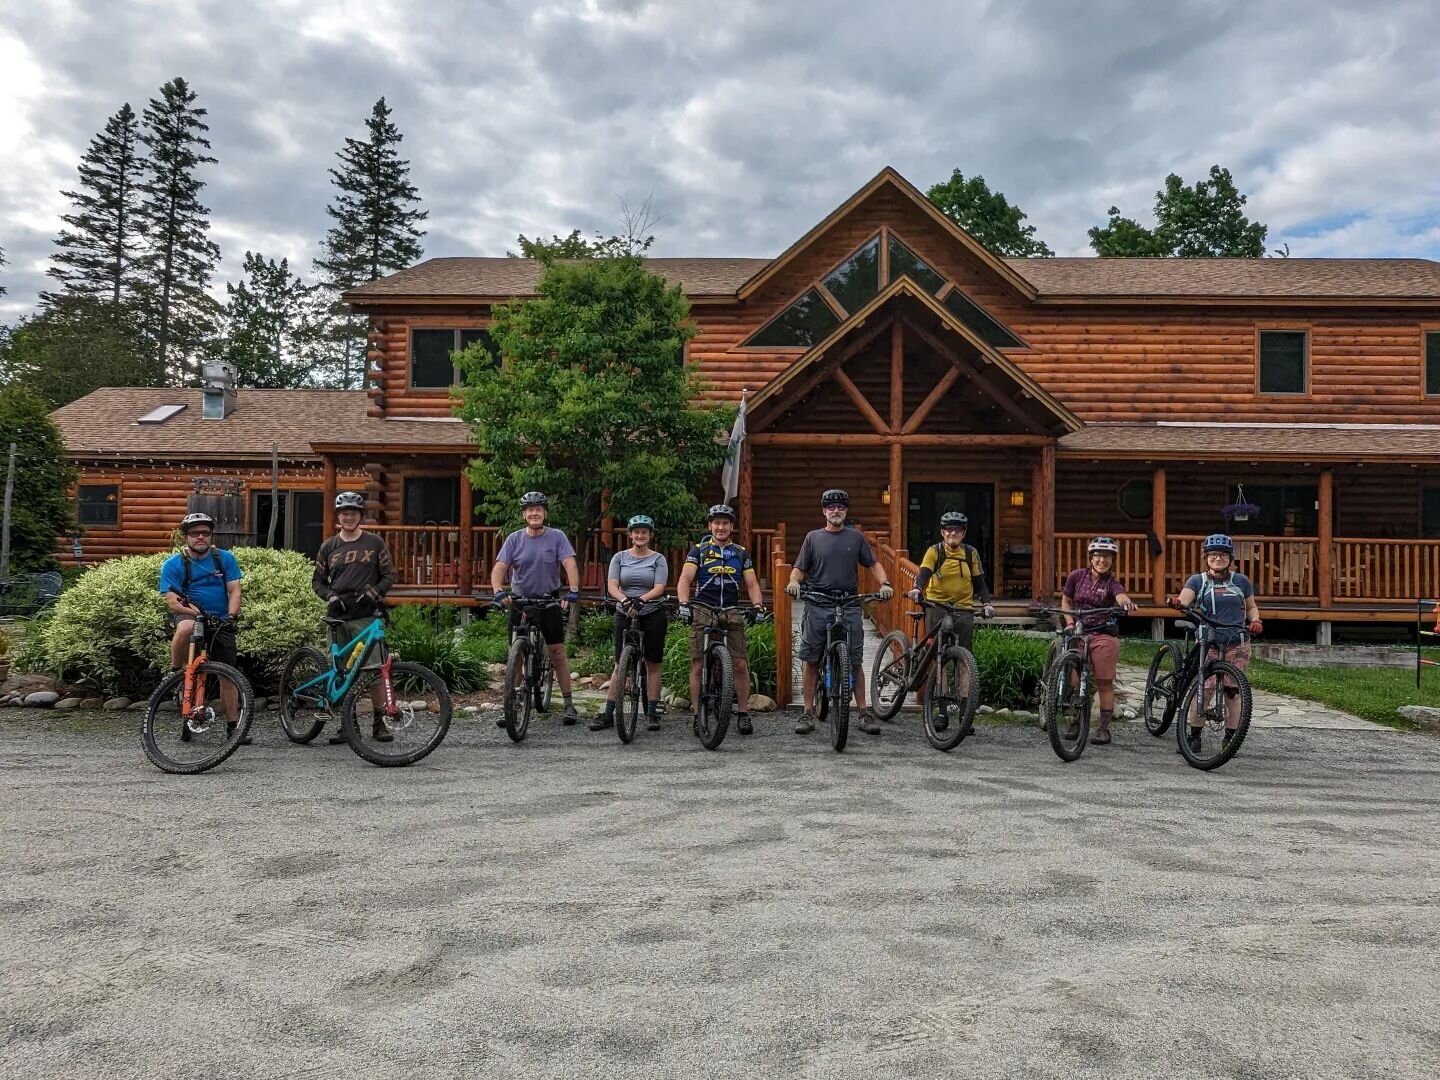 BIKE NIGHT! Join us every Tuesday evening at 5:30 for a jaunt through our local mountain biking trails! Enjoy a cold, Maine craft beer after a ride well done! All abilities welcome as this is a no drop ride. Hope to see you there! 

#carrabassettvall